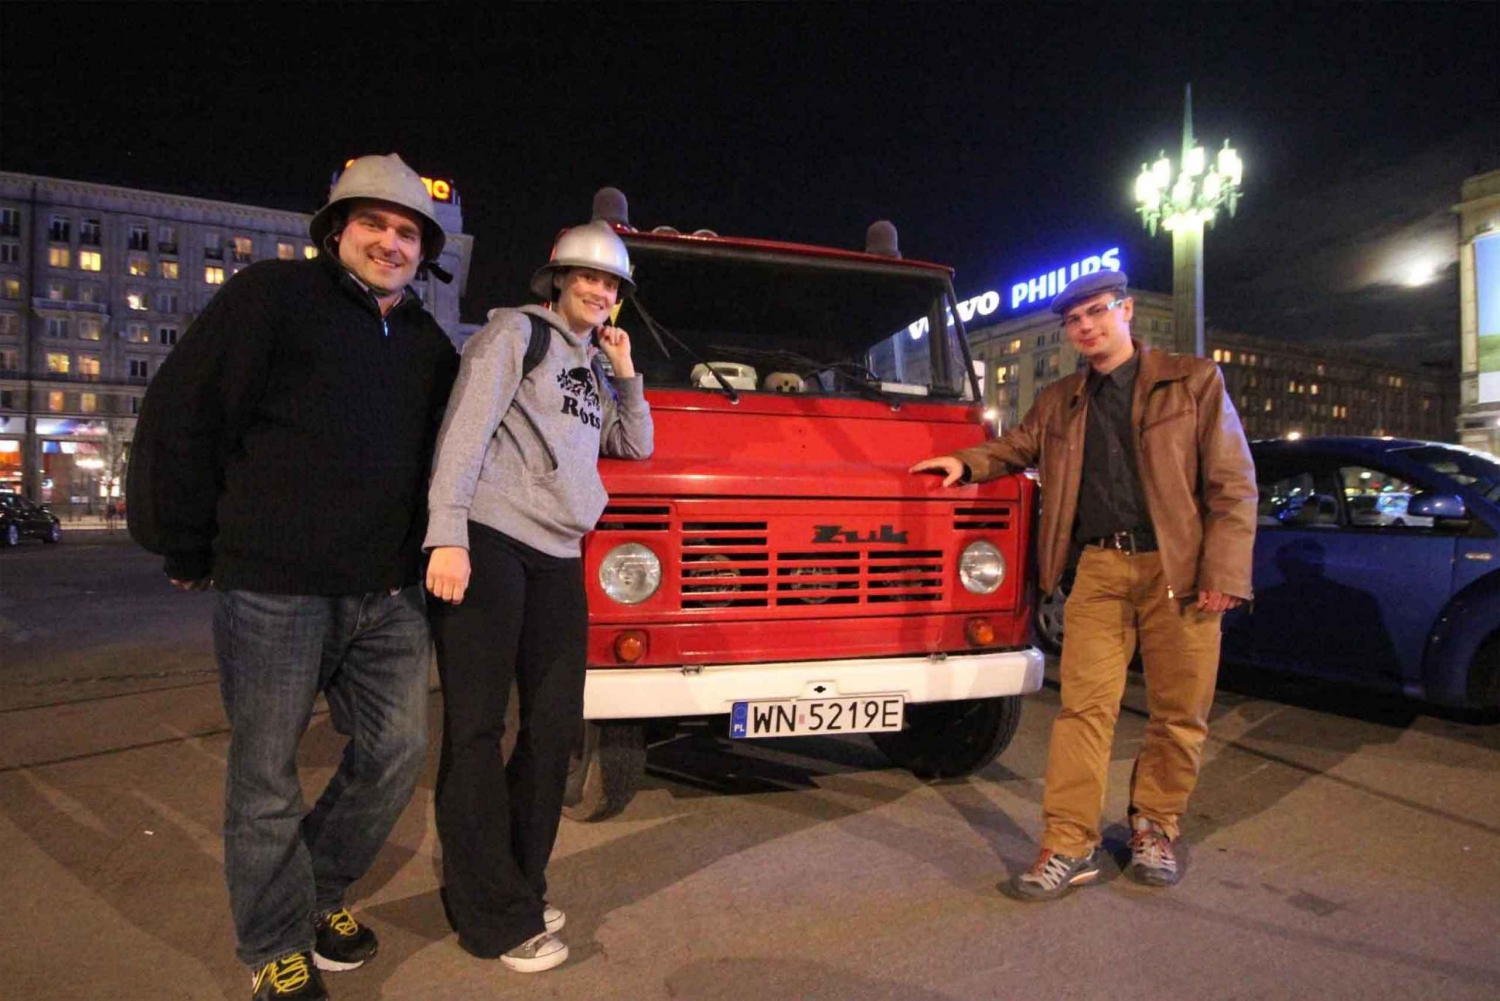 Warsaw: WWII Private Tour by Retro Minibus with Hotel Pickup